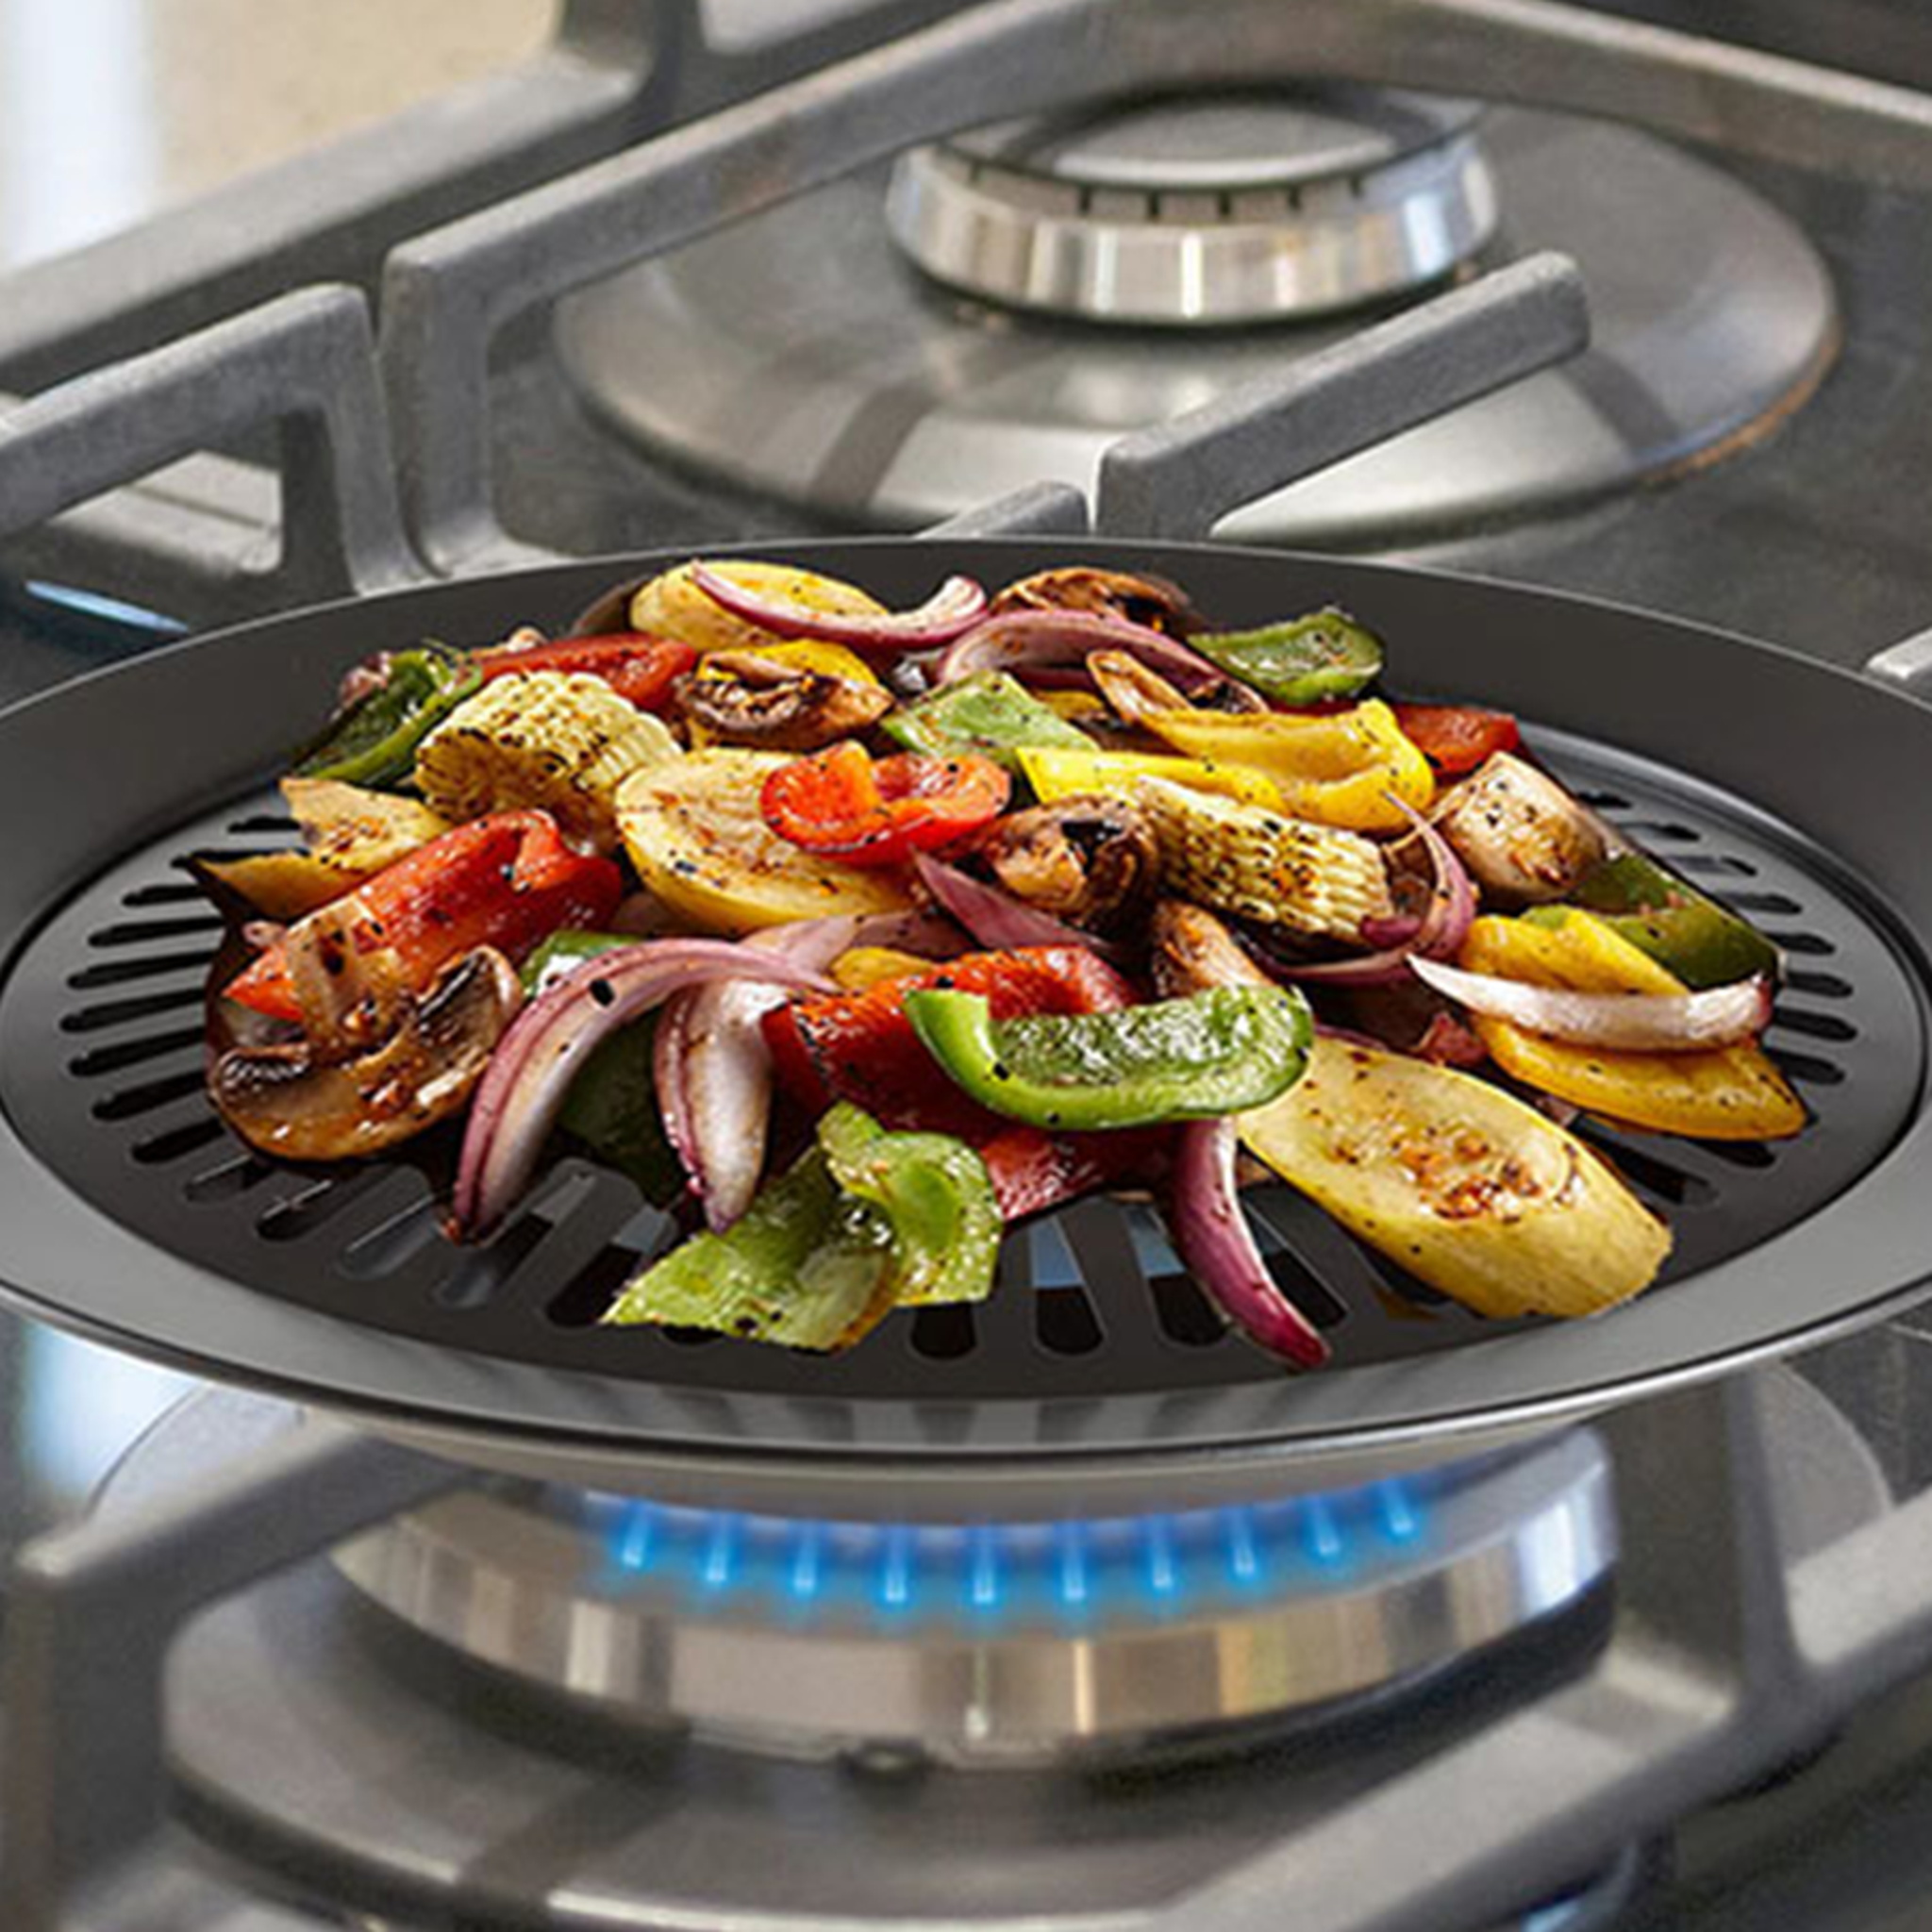 May Product of the Month - Al Fresco Smokeless BBQ Grill